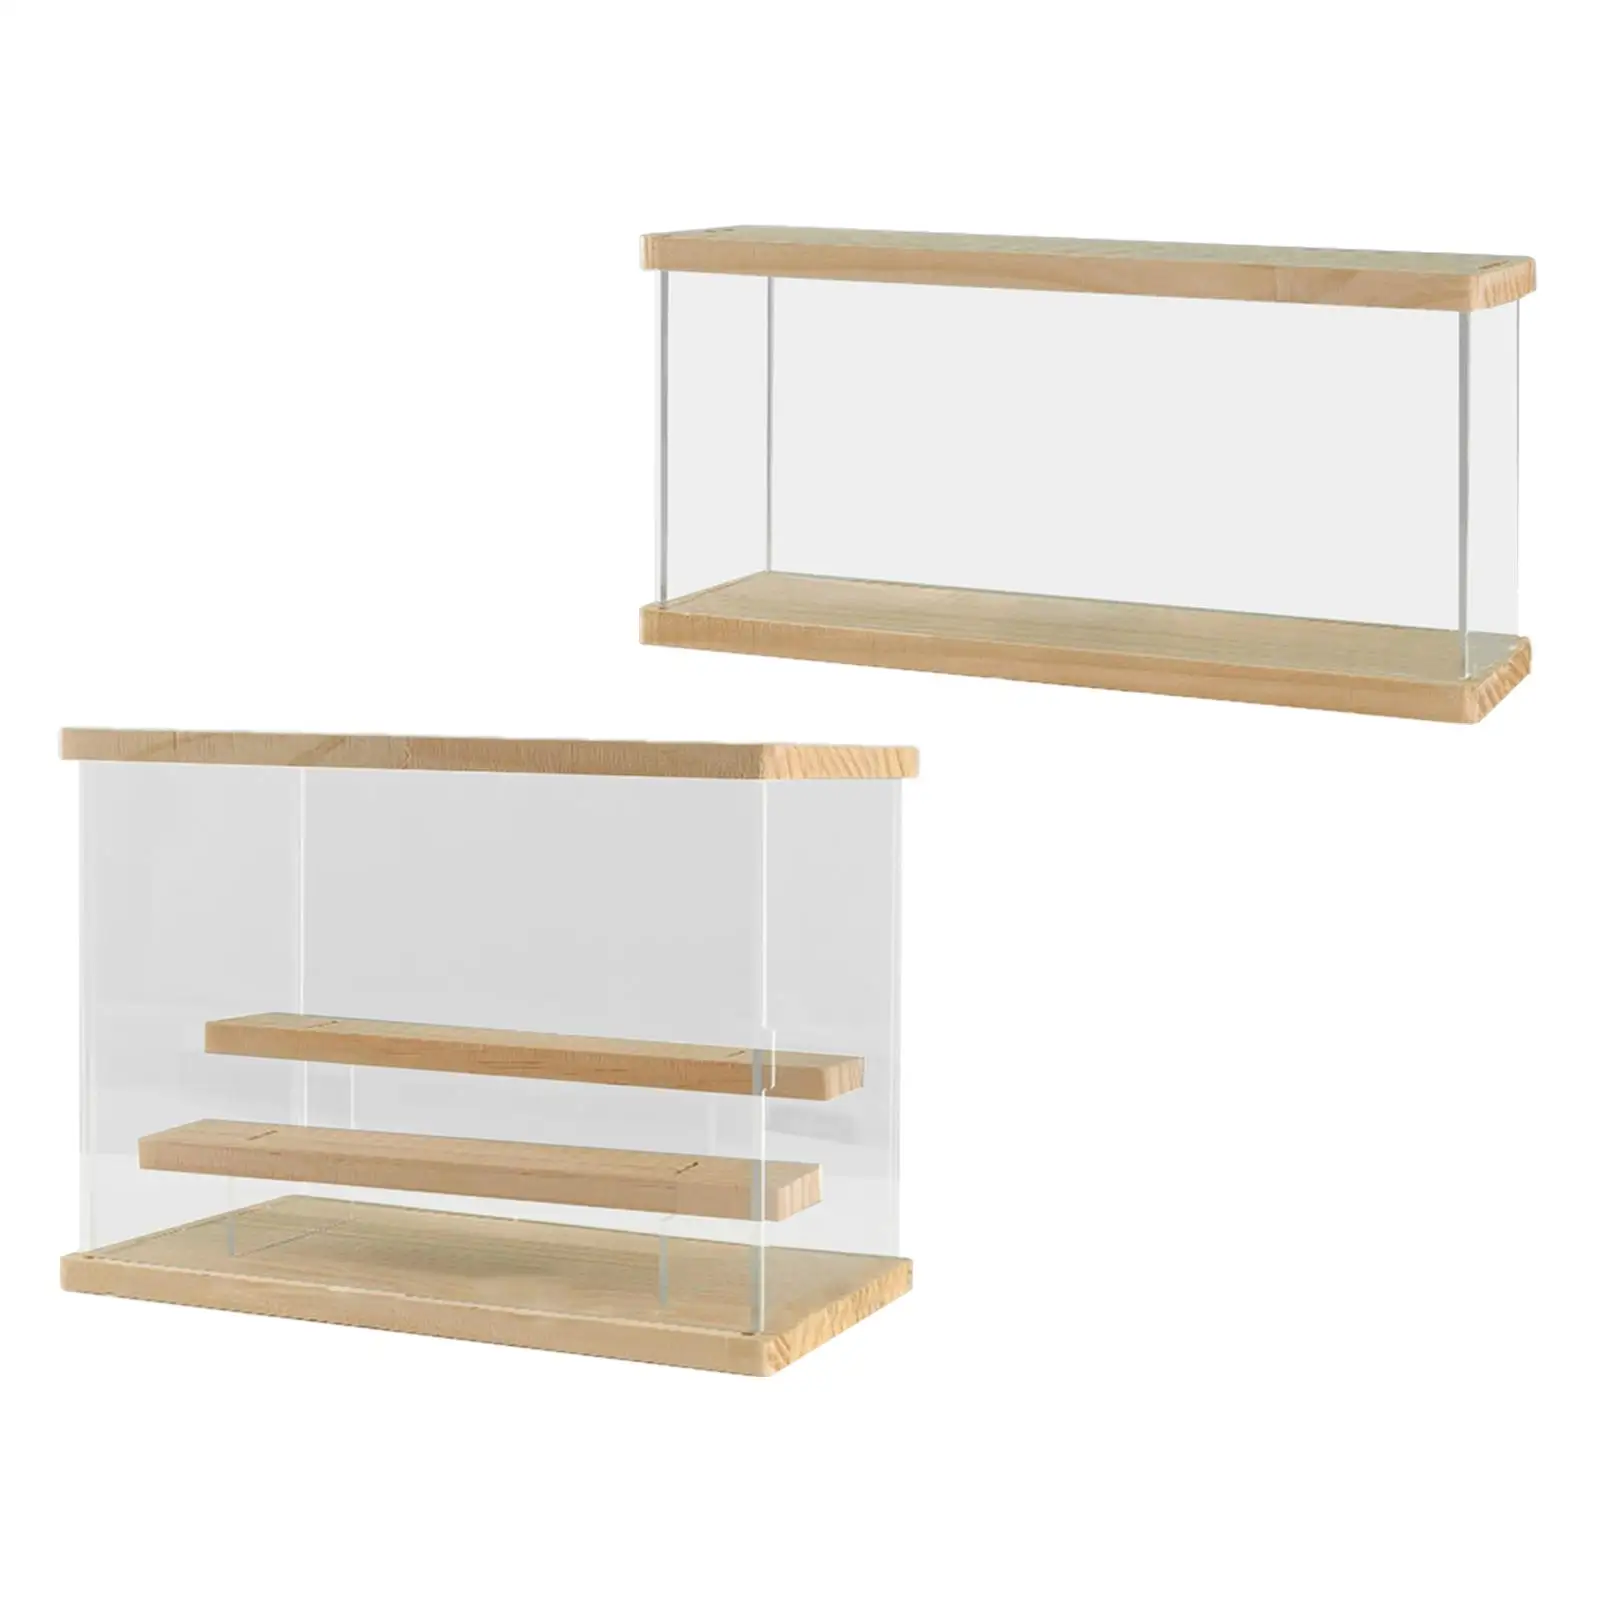 Acrylic Display Case Dustproof Showcase Protection Organizing Display Storage Box for Collectibles Countertop Model Doll